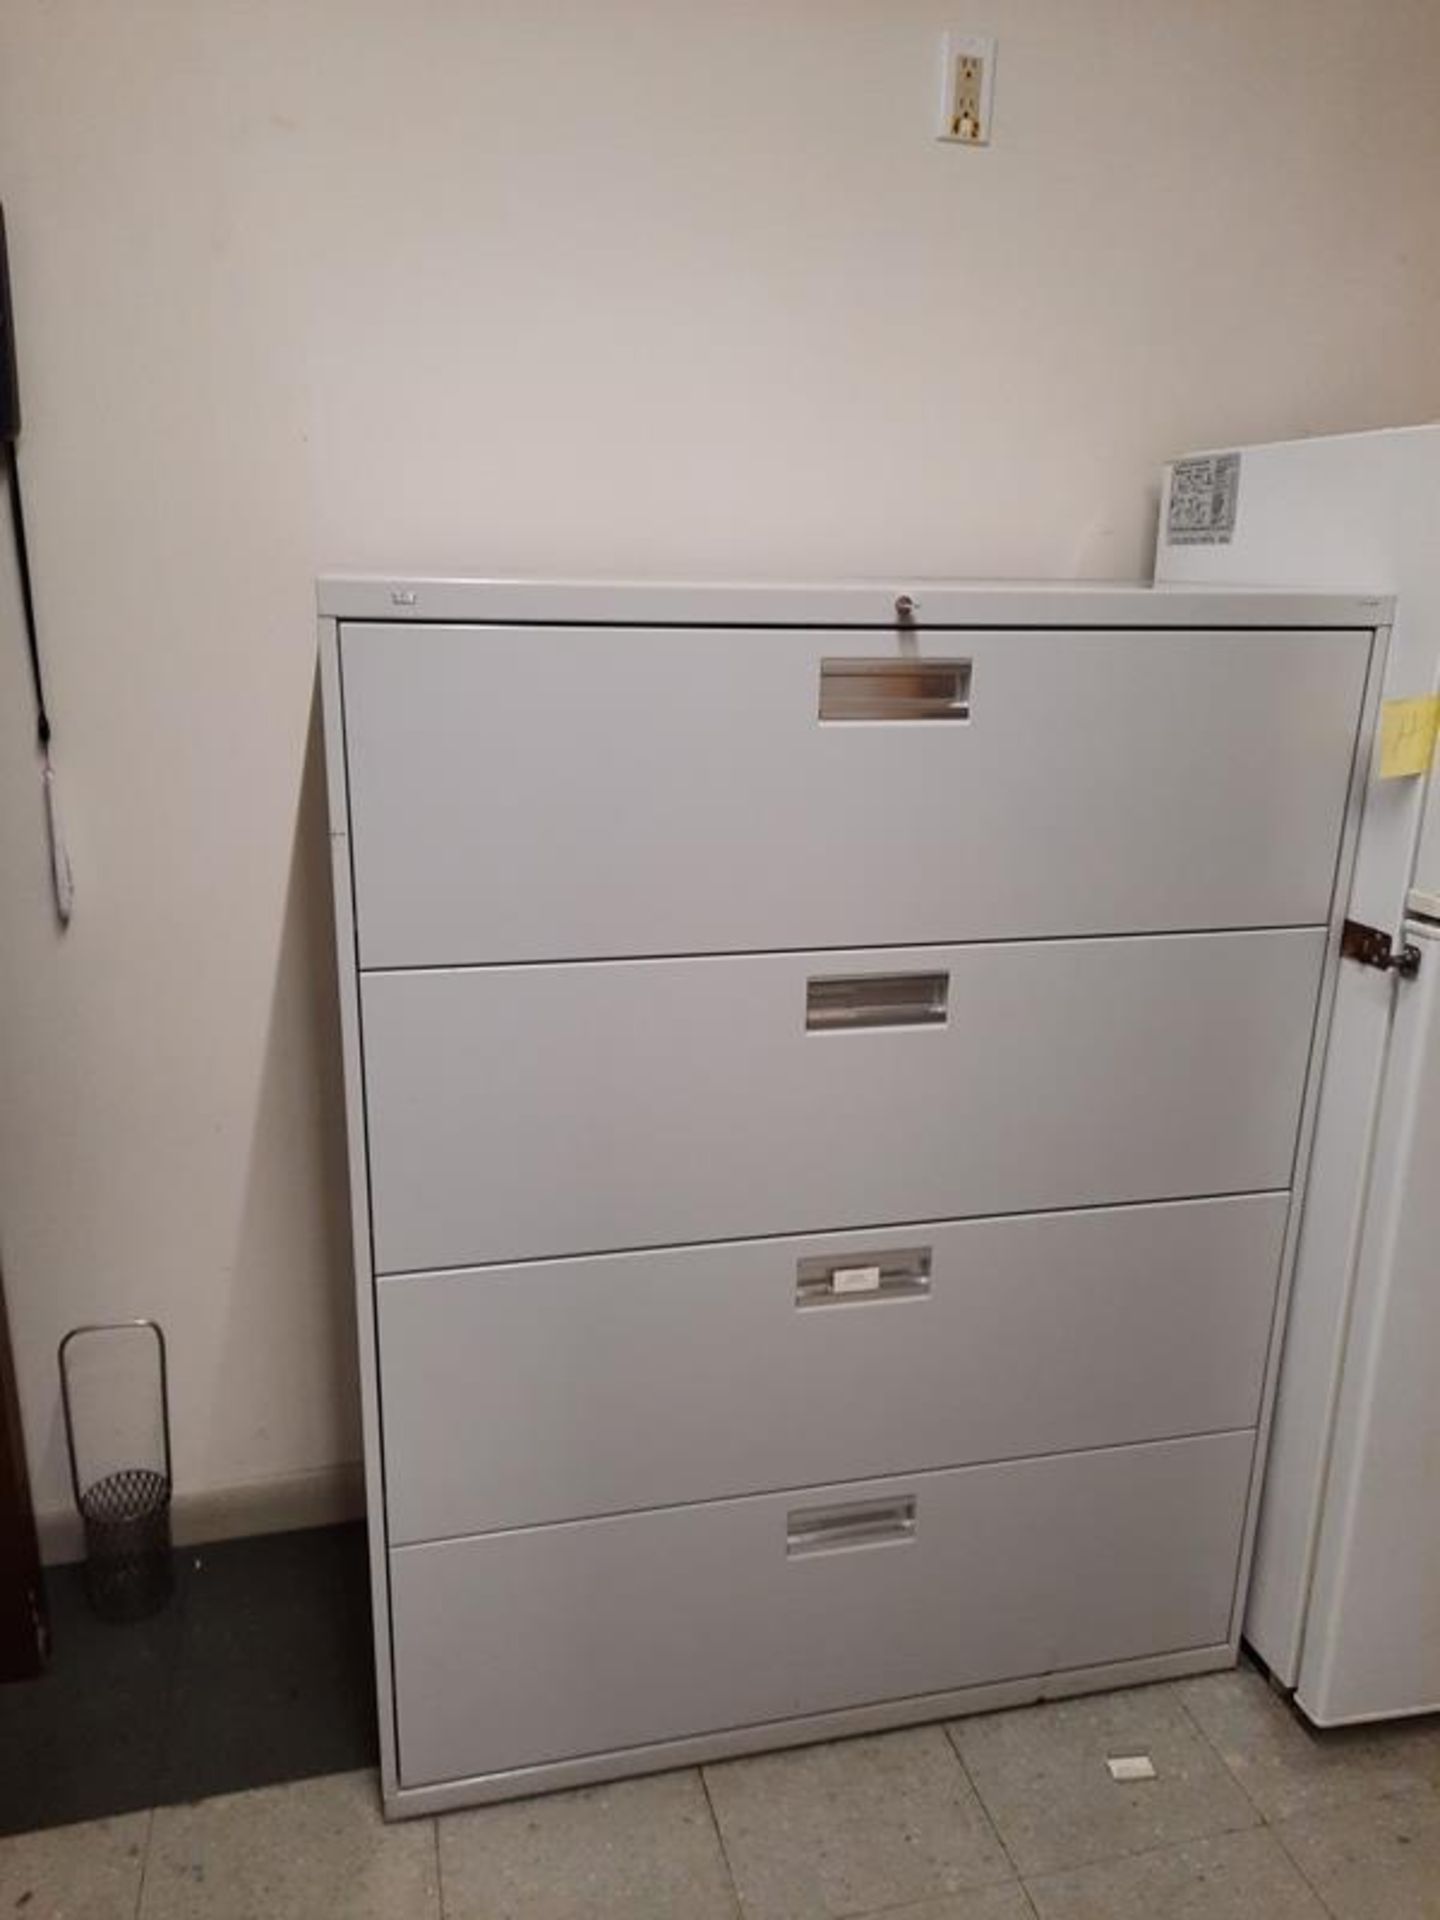 Lot of Desk, Chairs, Lateral File, Microwave, Soap & Towel Dispenser, File Cabinet, (Required